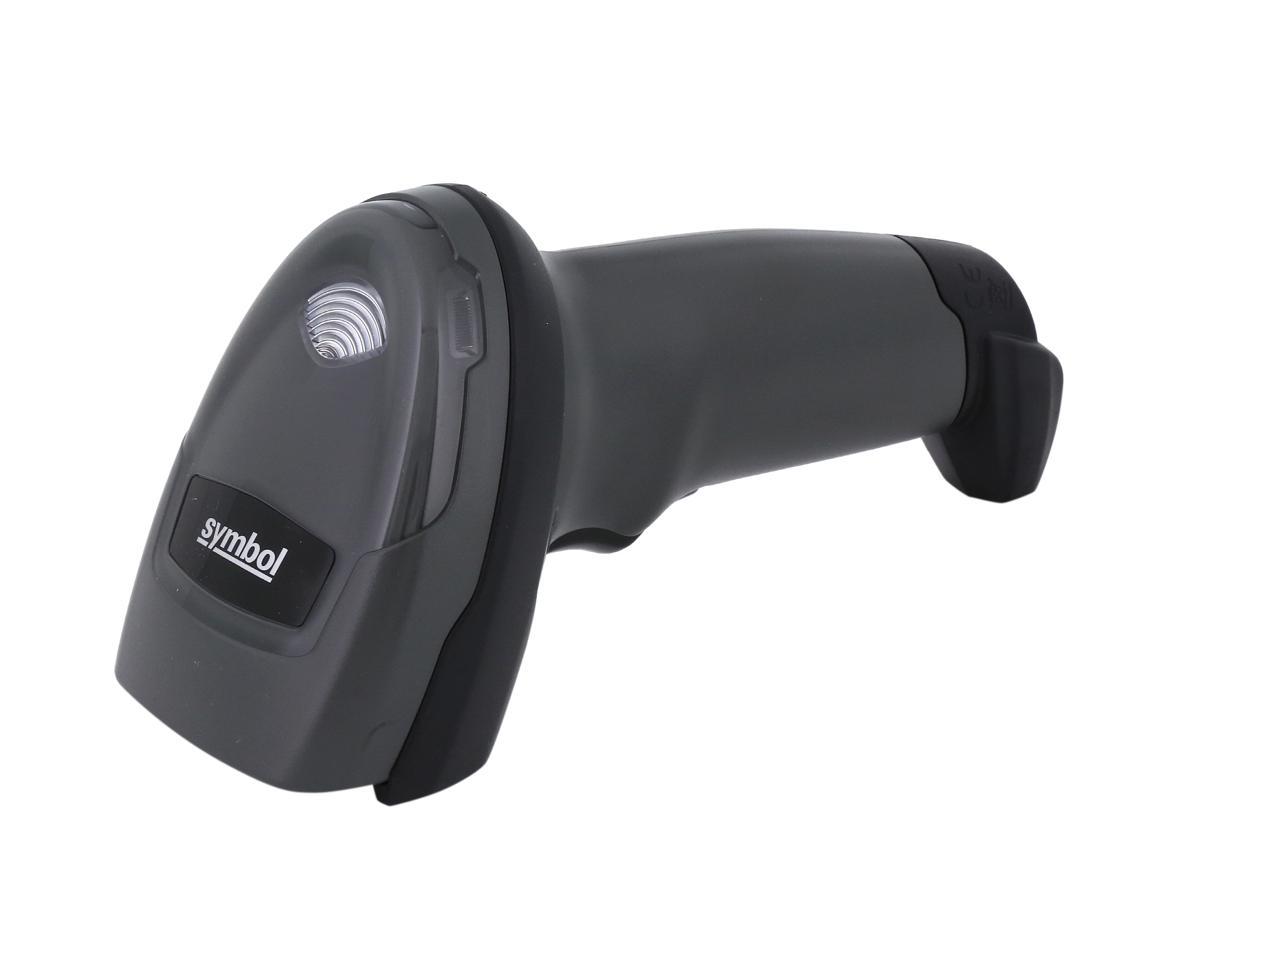 1-D, 2-D PDF417 Zebra Symbol DS4308-HD Next Generation Handheld Omnidirectional Barcode Scanner/Imager Includes Stand USB Cord 